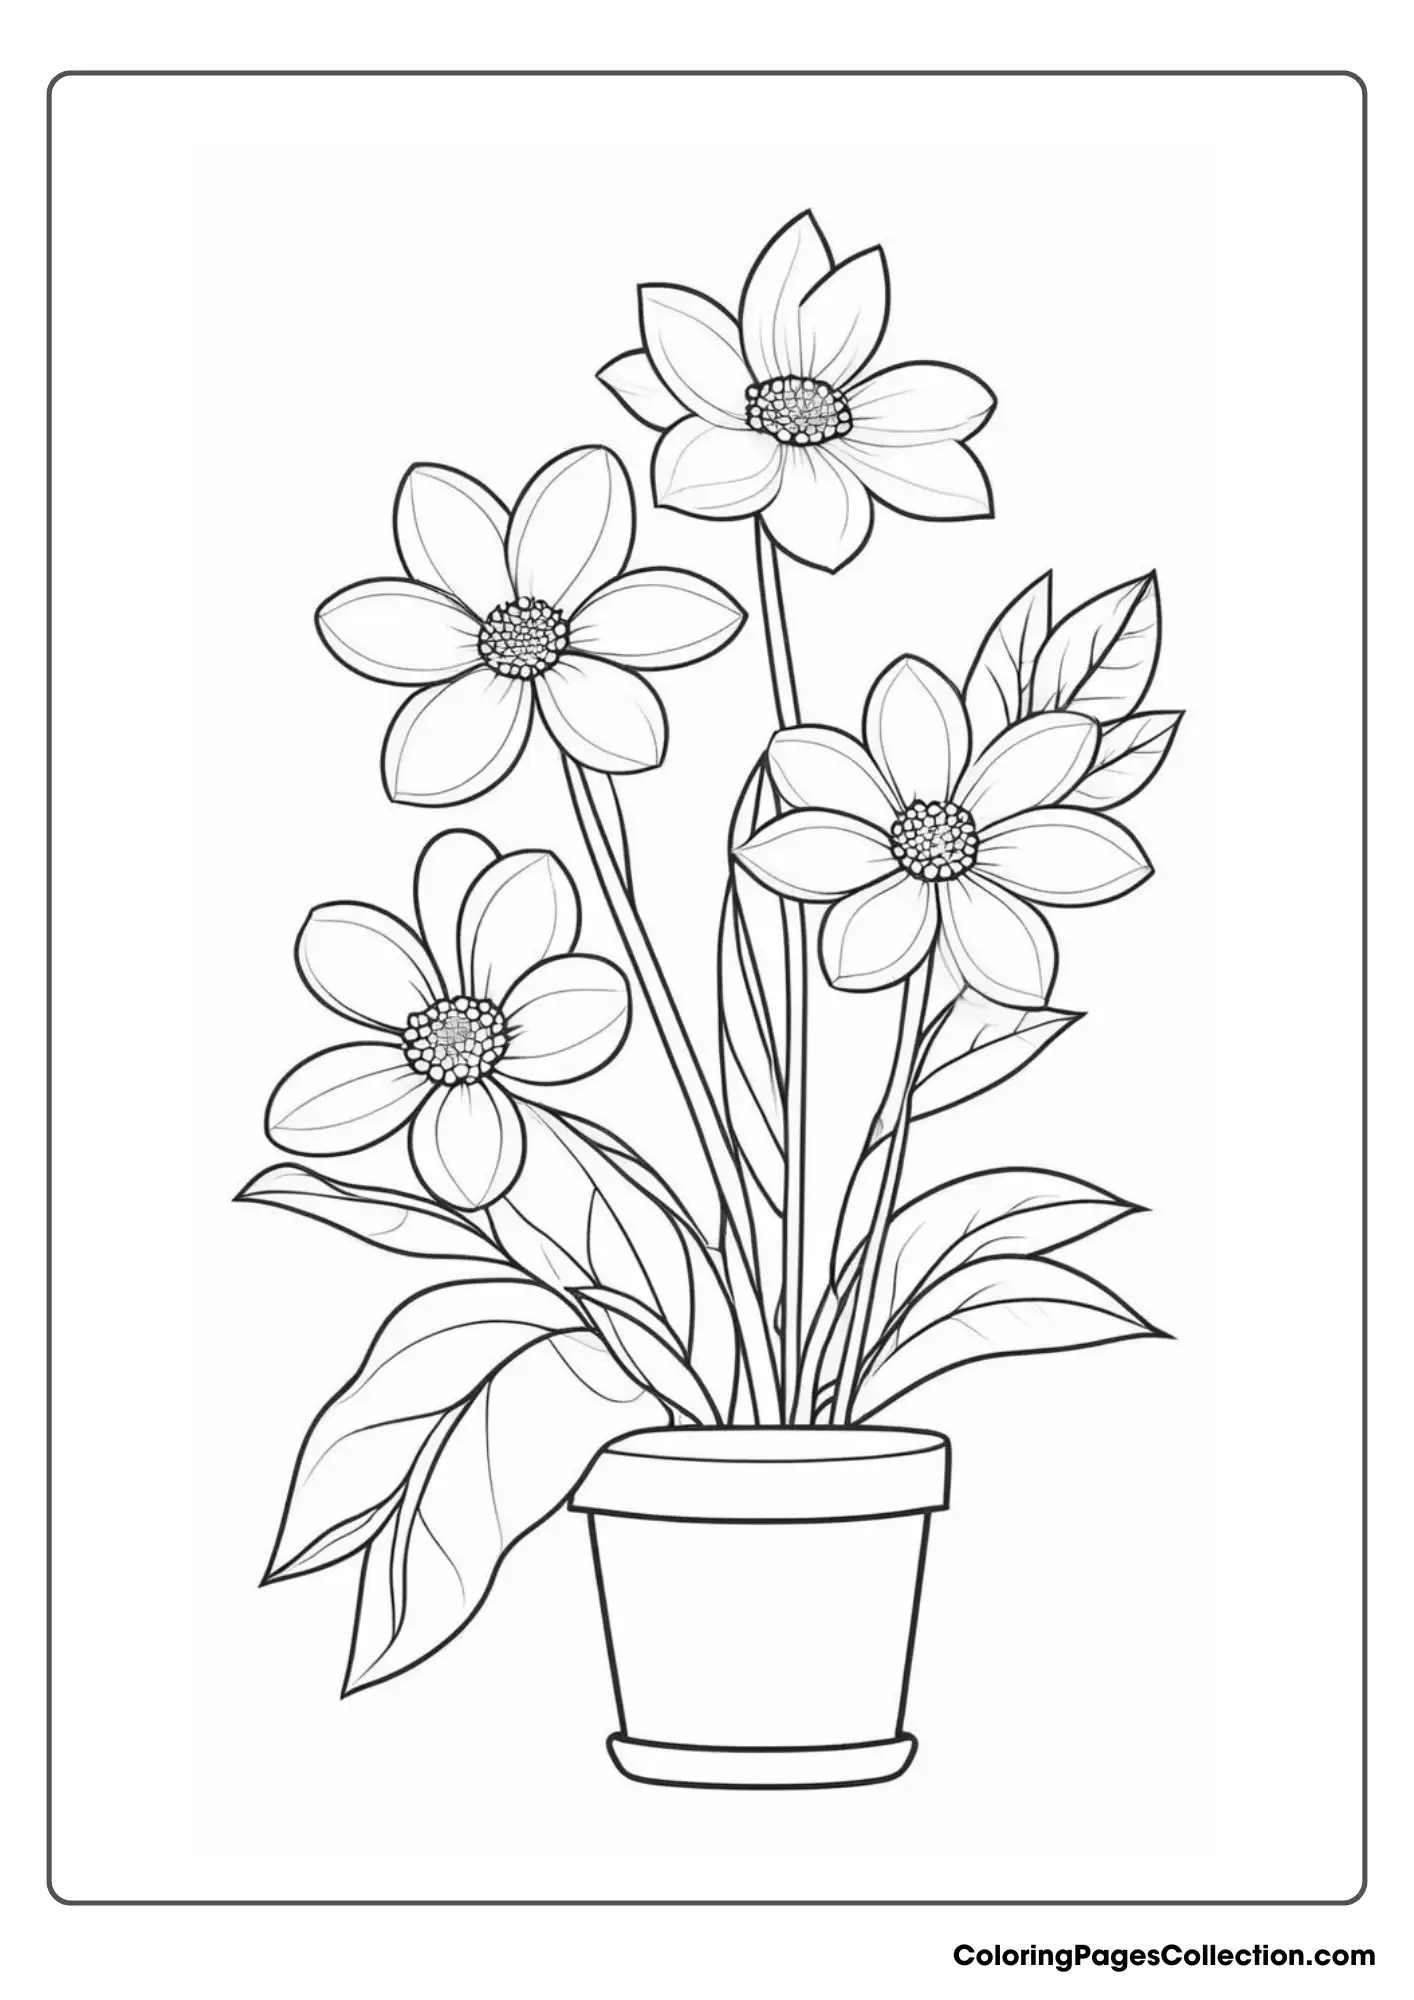 A Drawing Of A Plant In A Pot